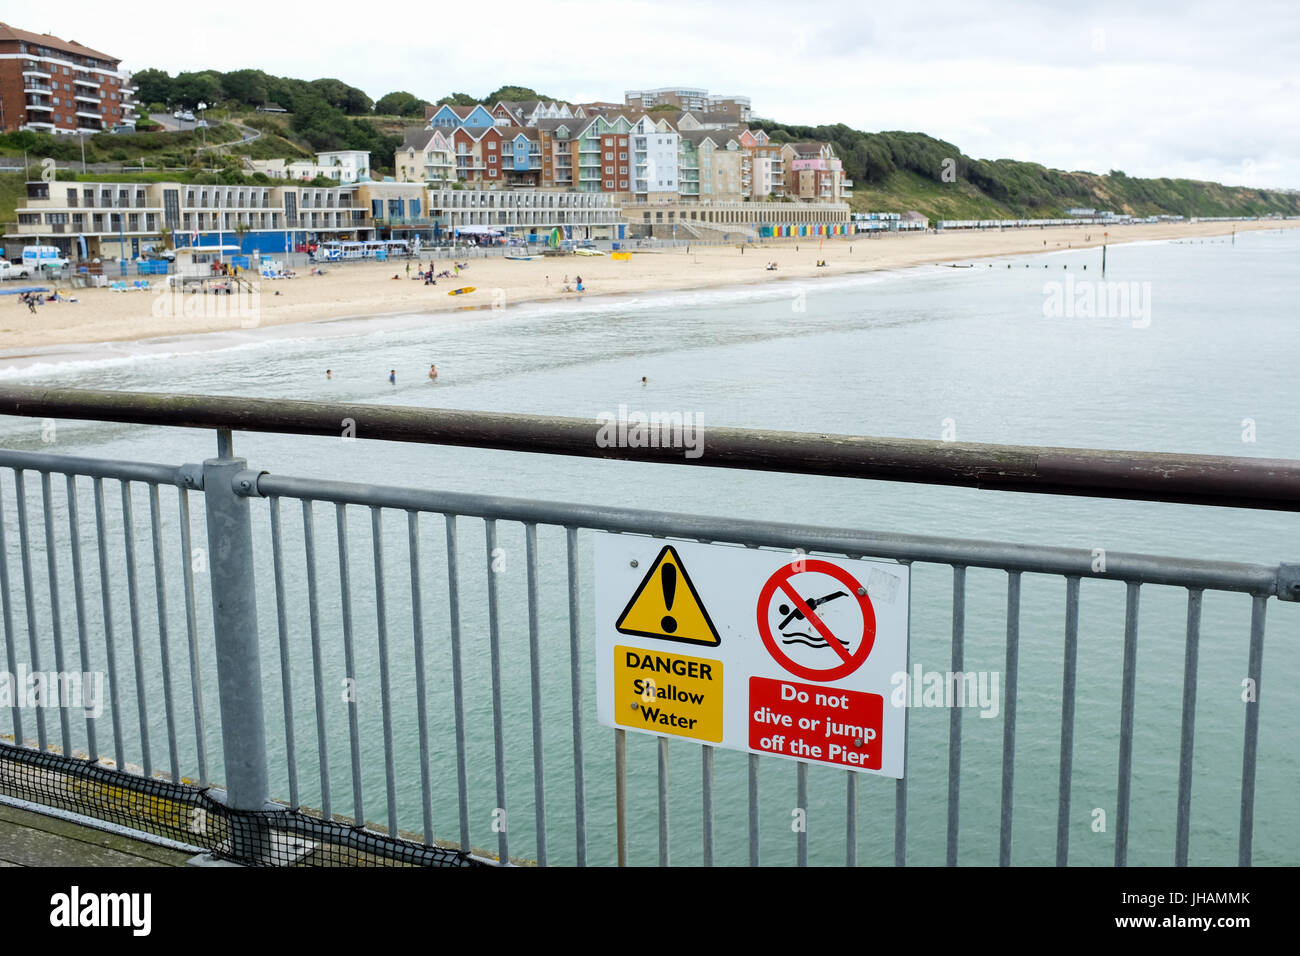 A sign warning people of shallow sea water and telling people not to dive or jump off the pier (Boscombe pier near Bournemouth in Dorset, England). Stock Photo